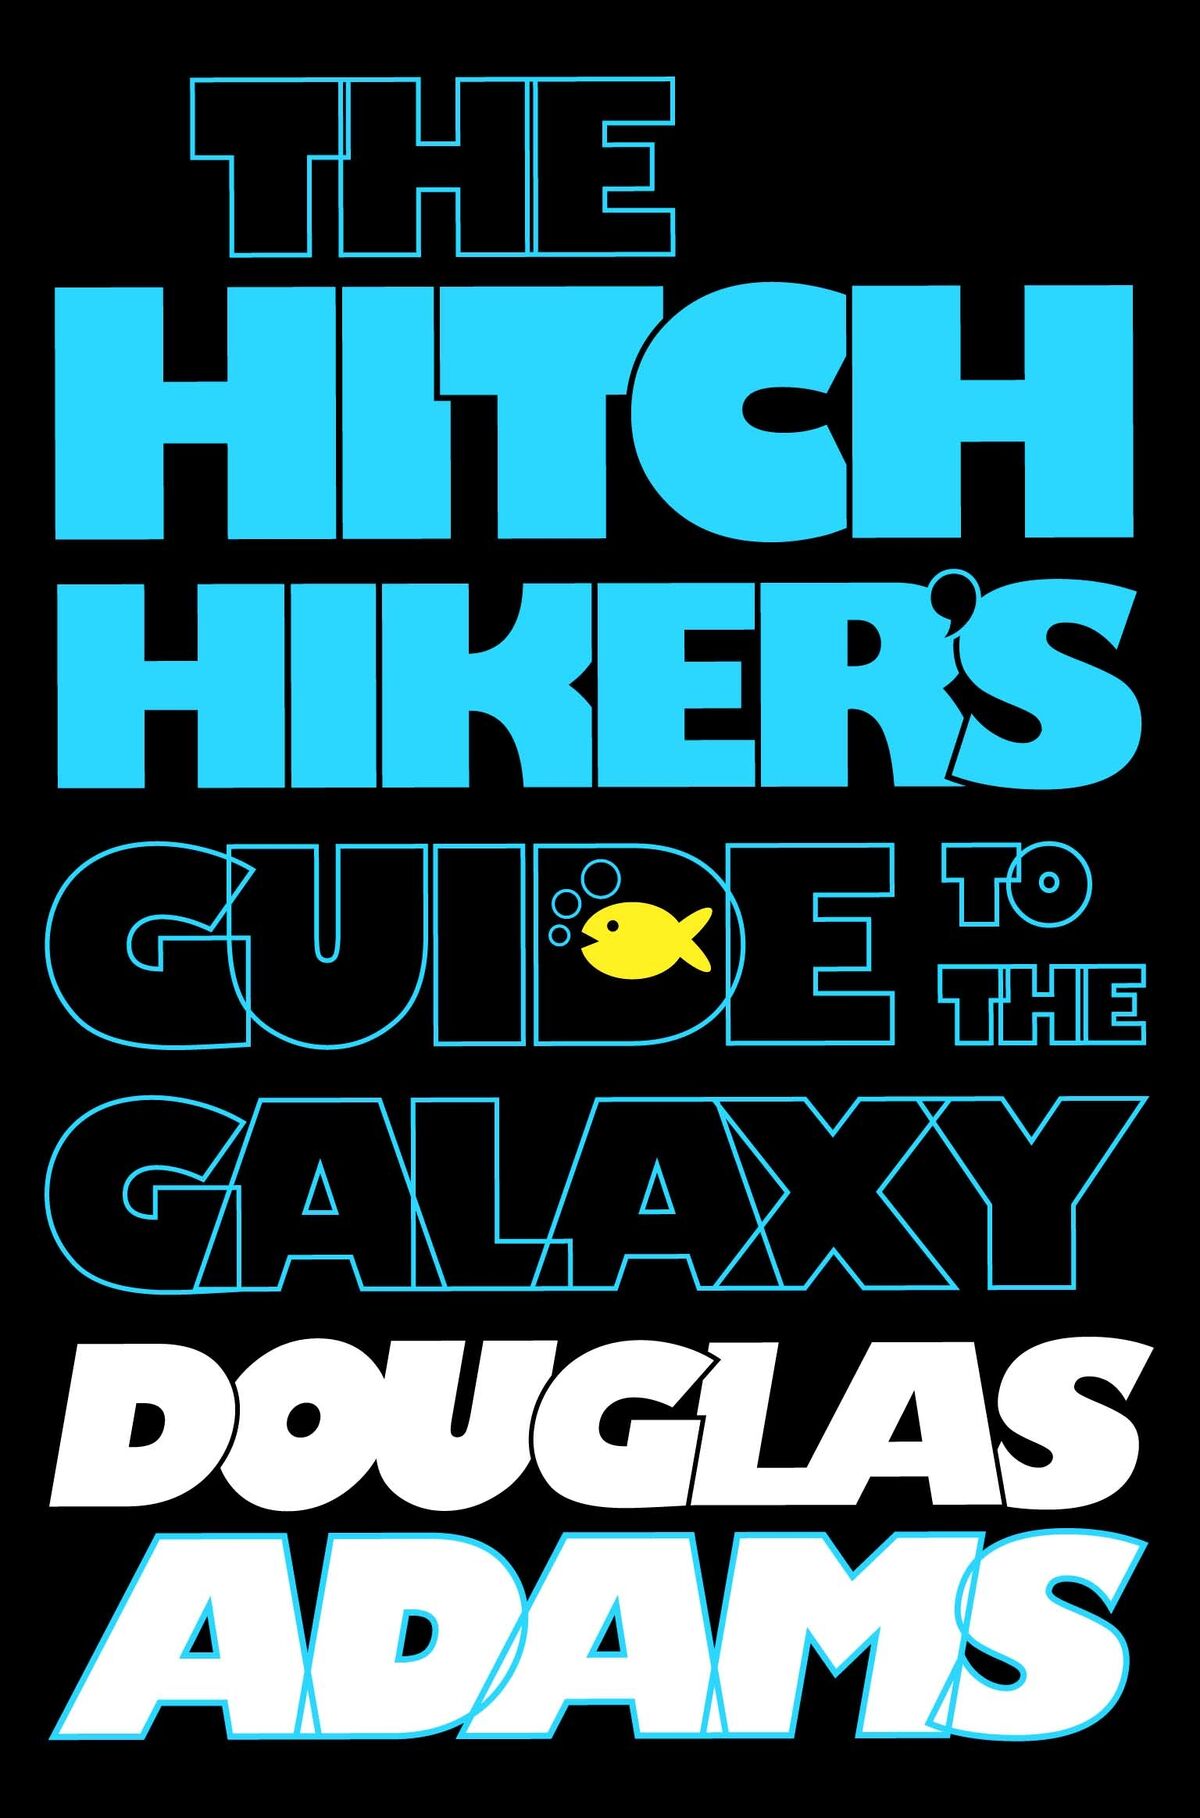 44 HHGG ideas  hitchhikers guide to the galaxy, guide to the galaxy,  hitchhikers guide